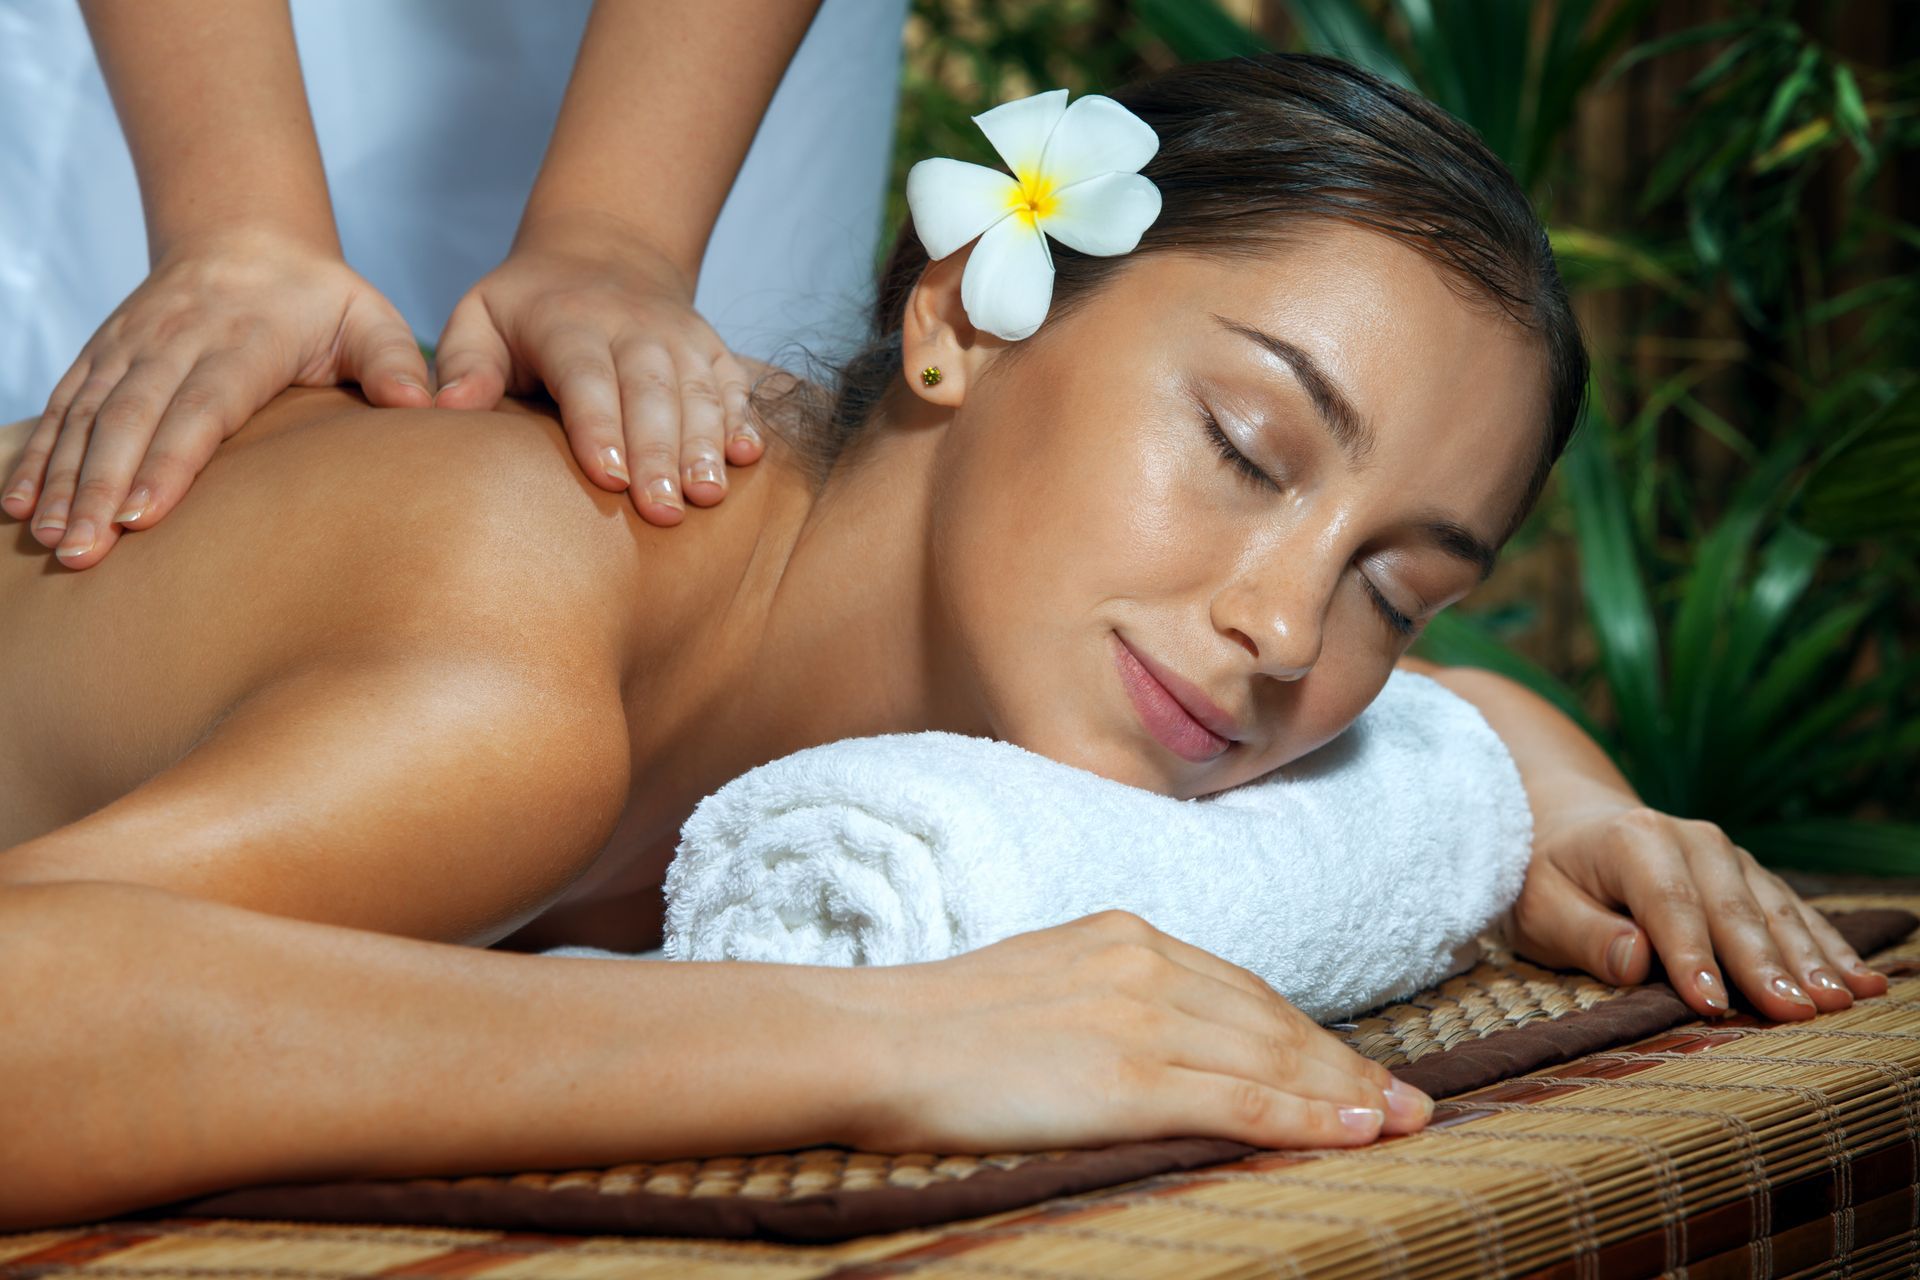 a woman is getting a massage with a flower in her hair